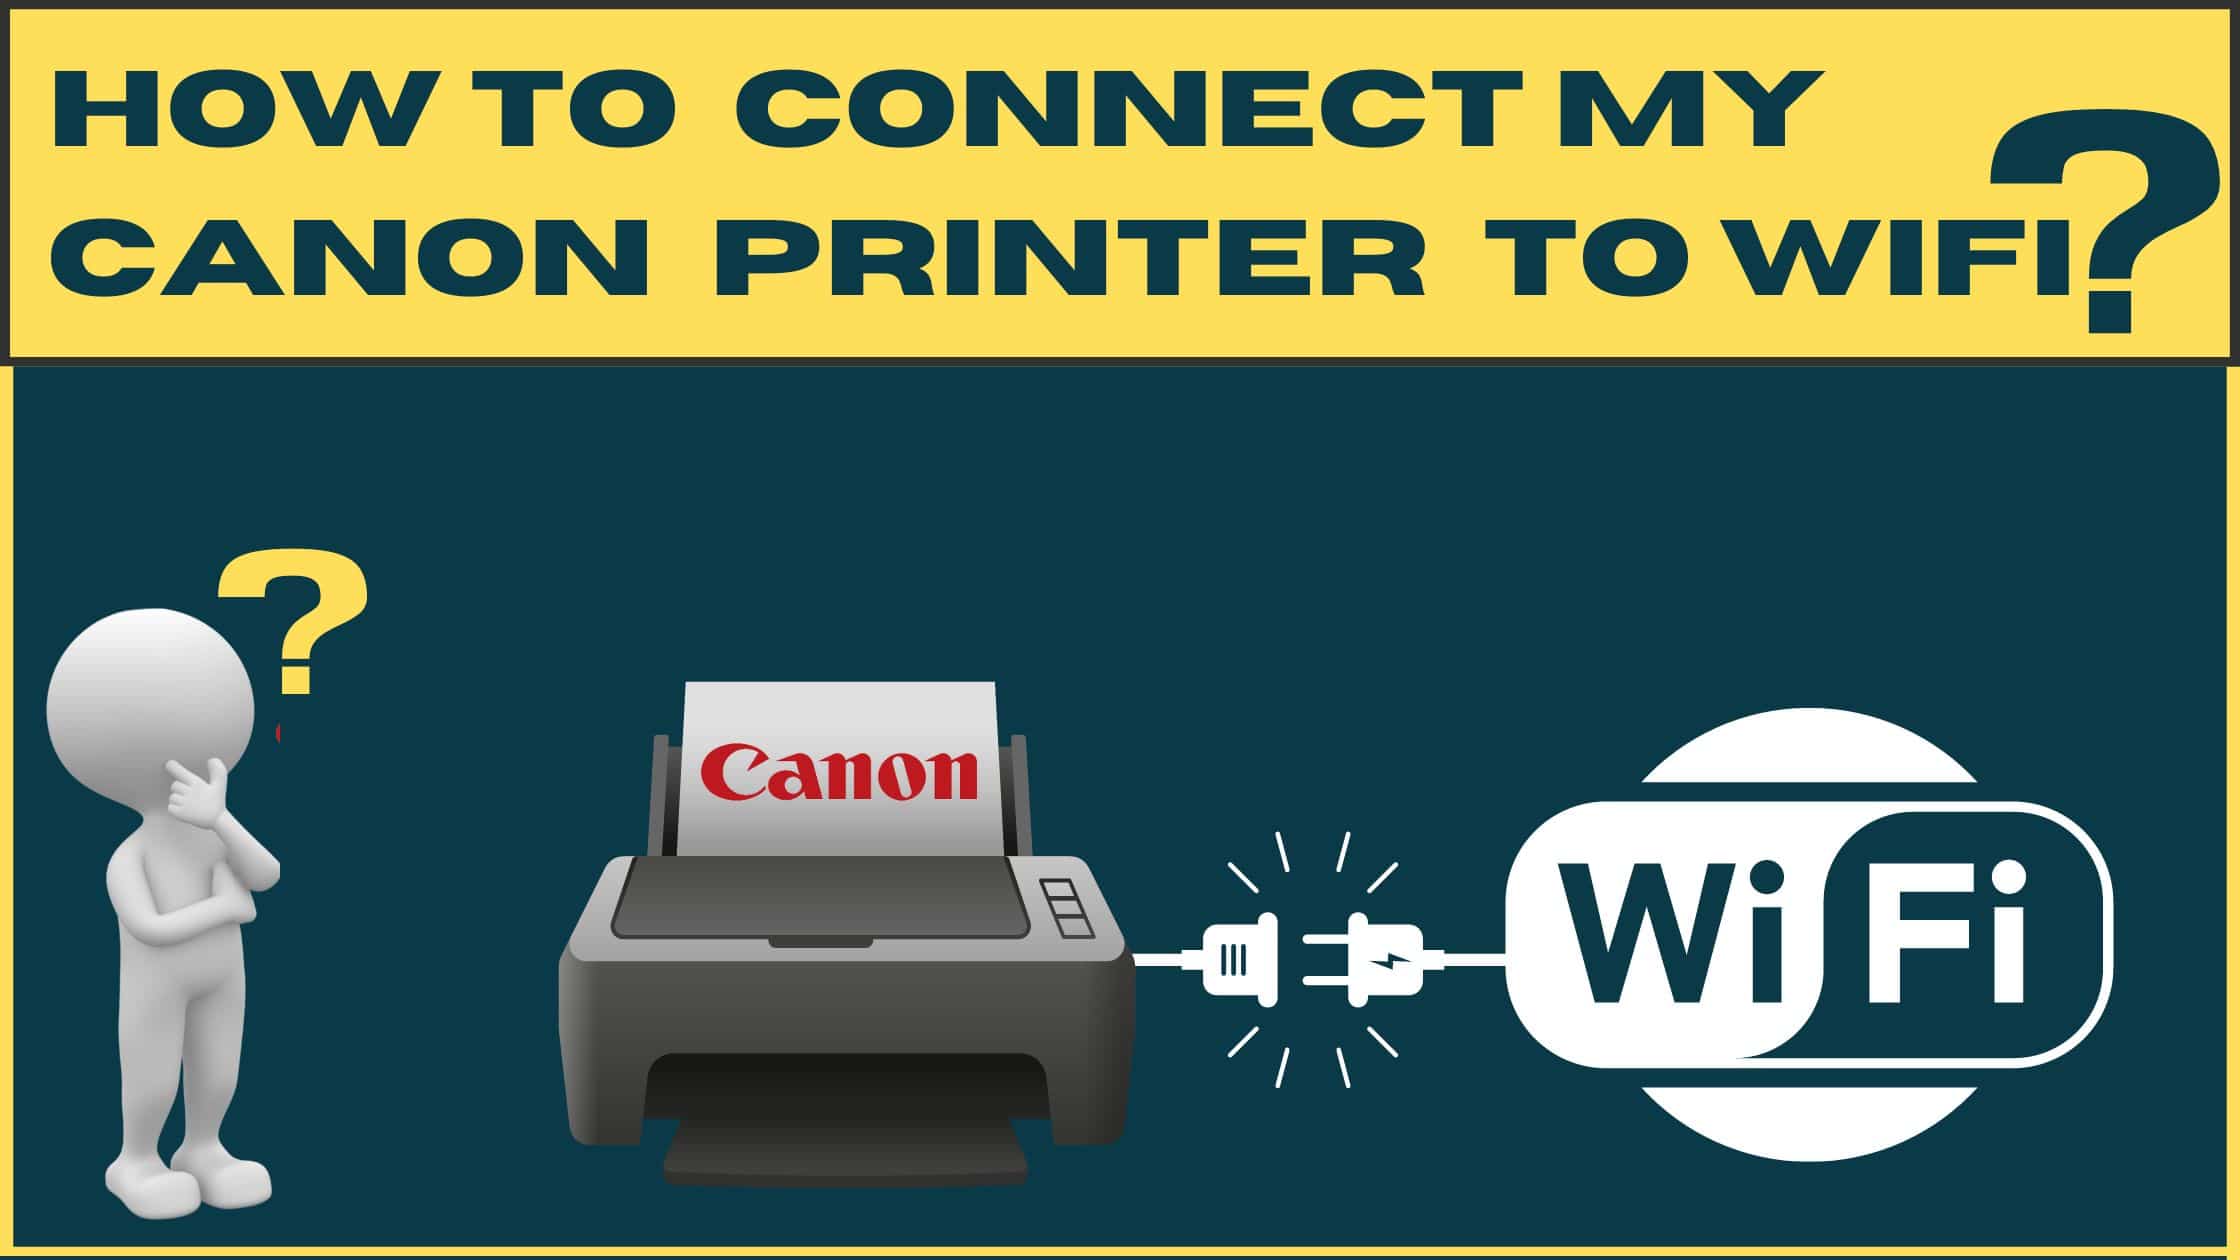 Steps to connect cannon printer to wifi